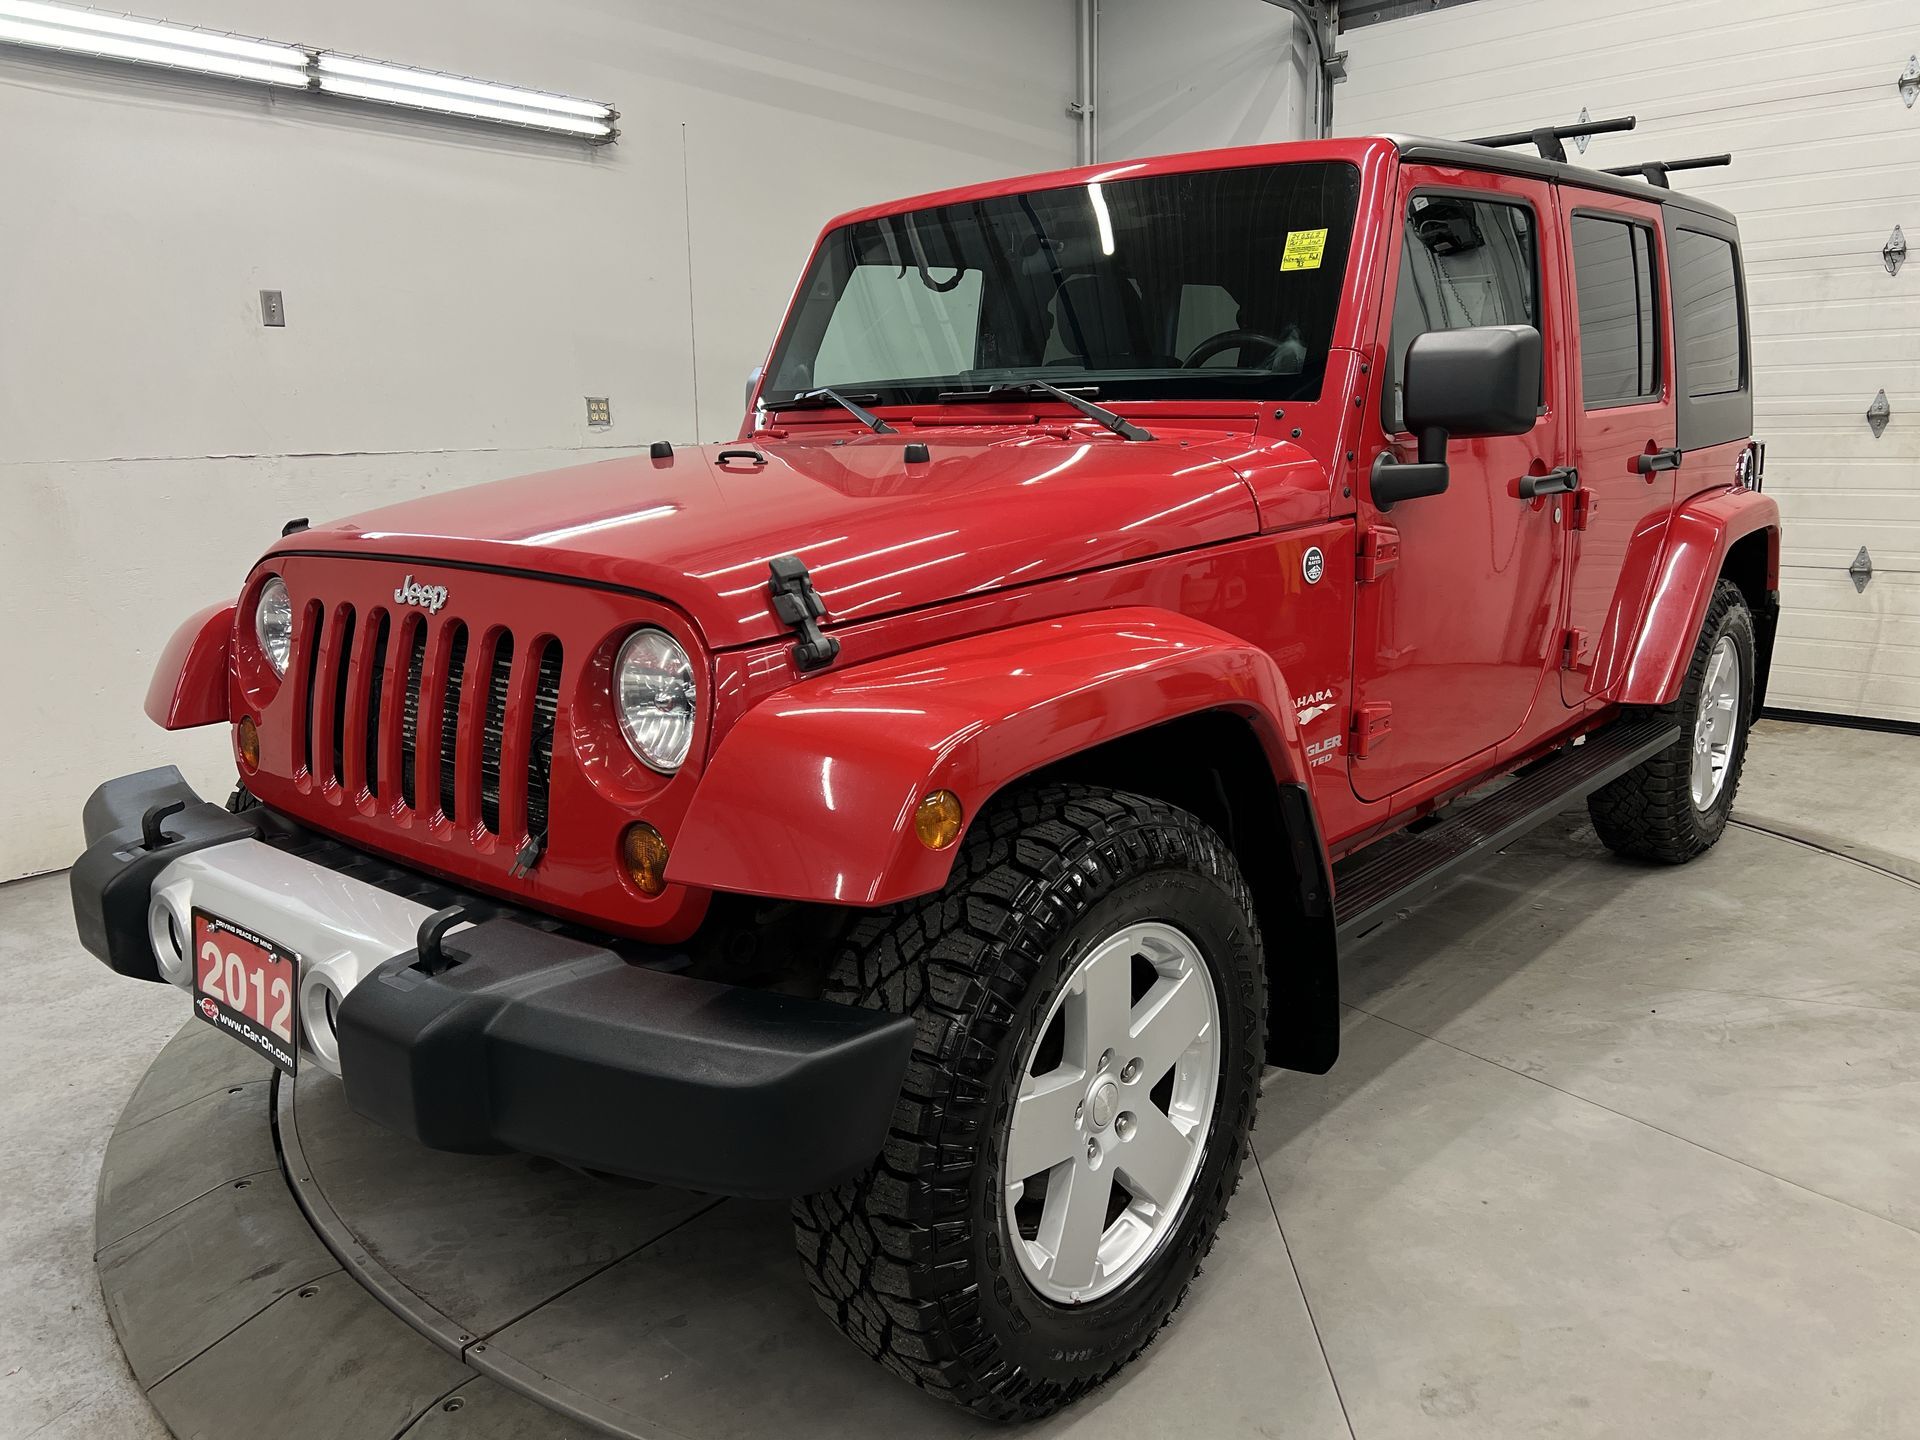 2012 Jeep WRANGLER UNLIMITED SAHARA 4x4 | HARD TOP | REMOTE START | LOW KMS!